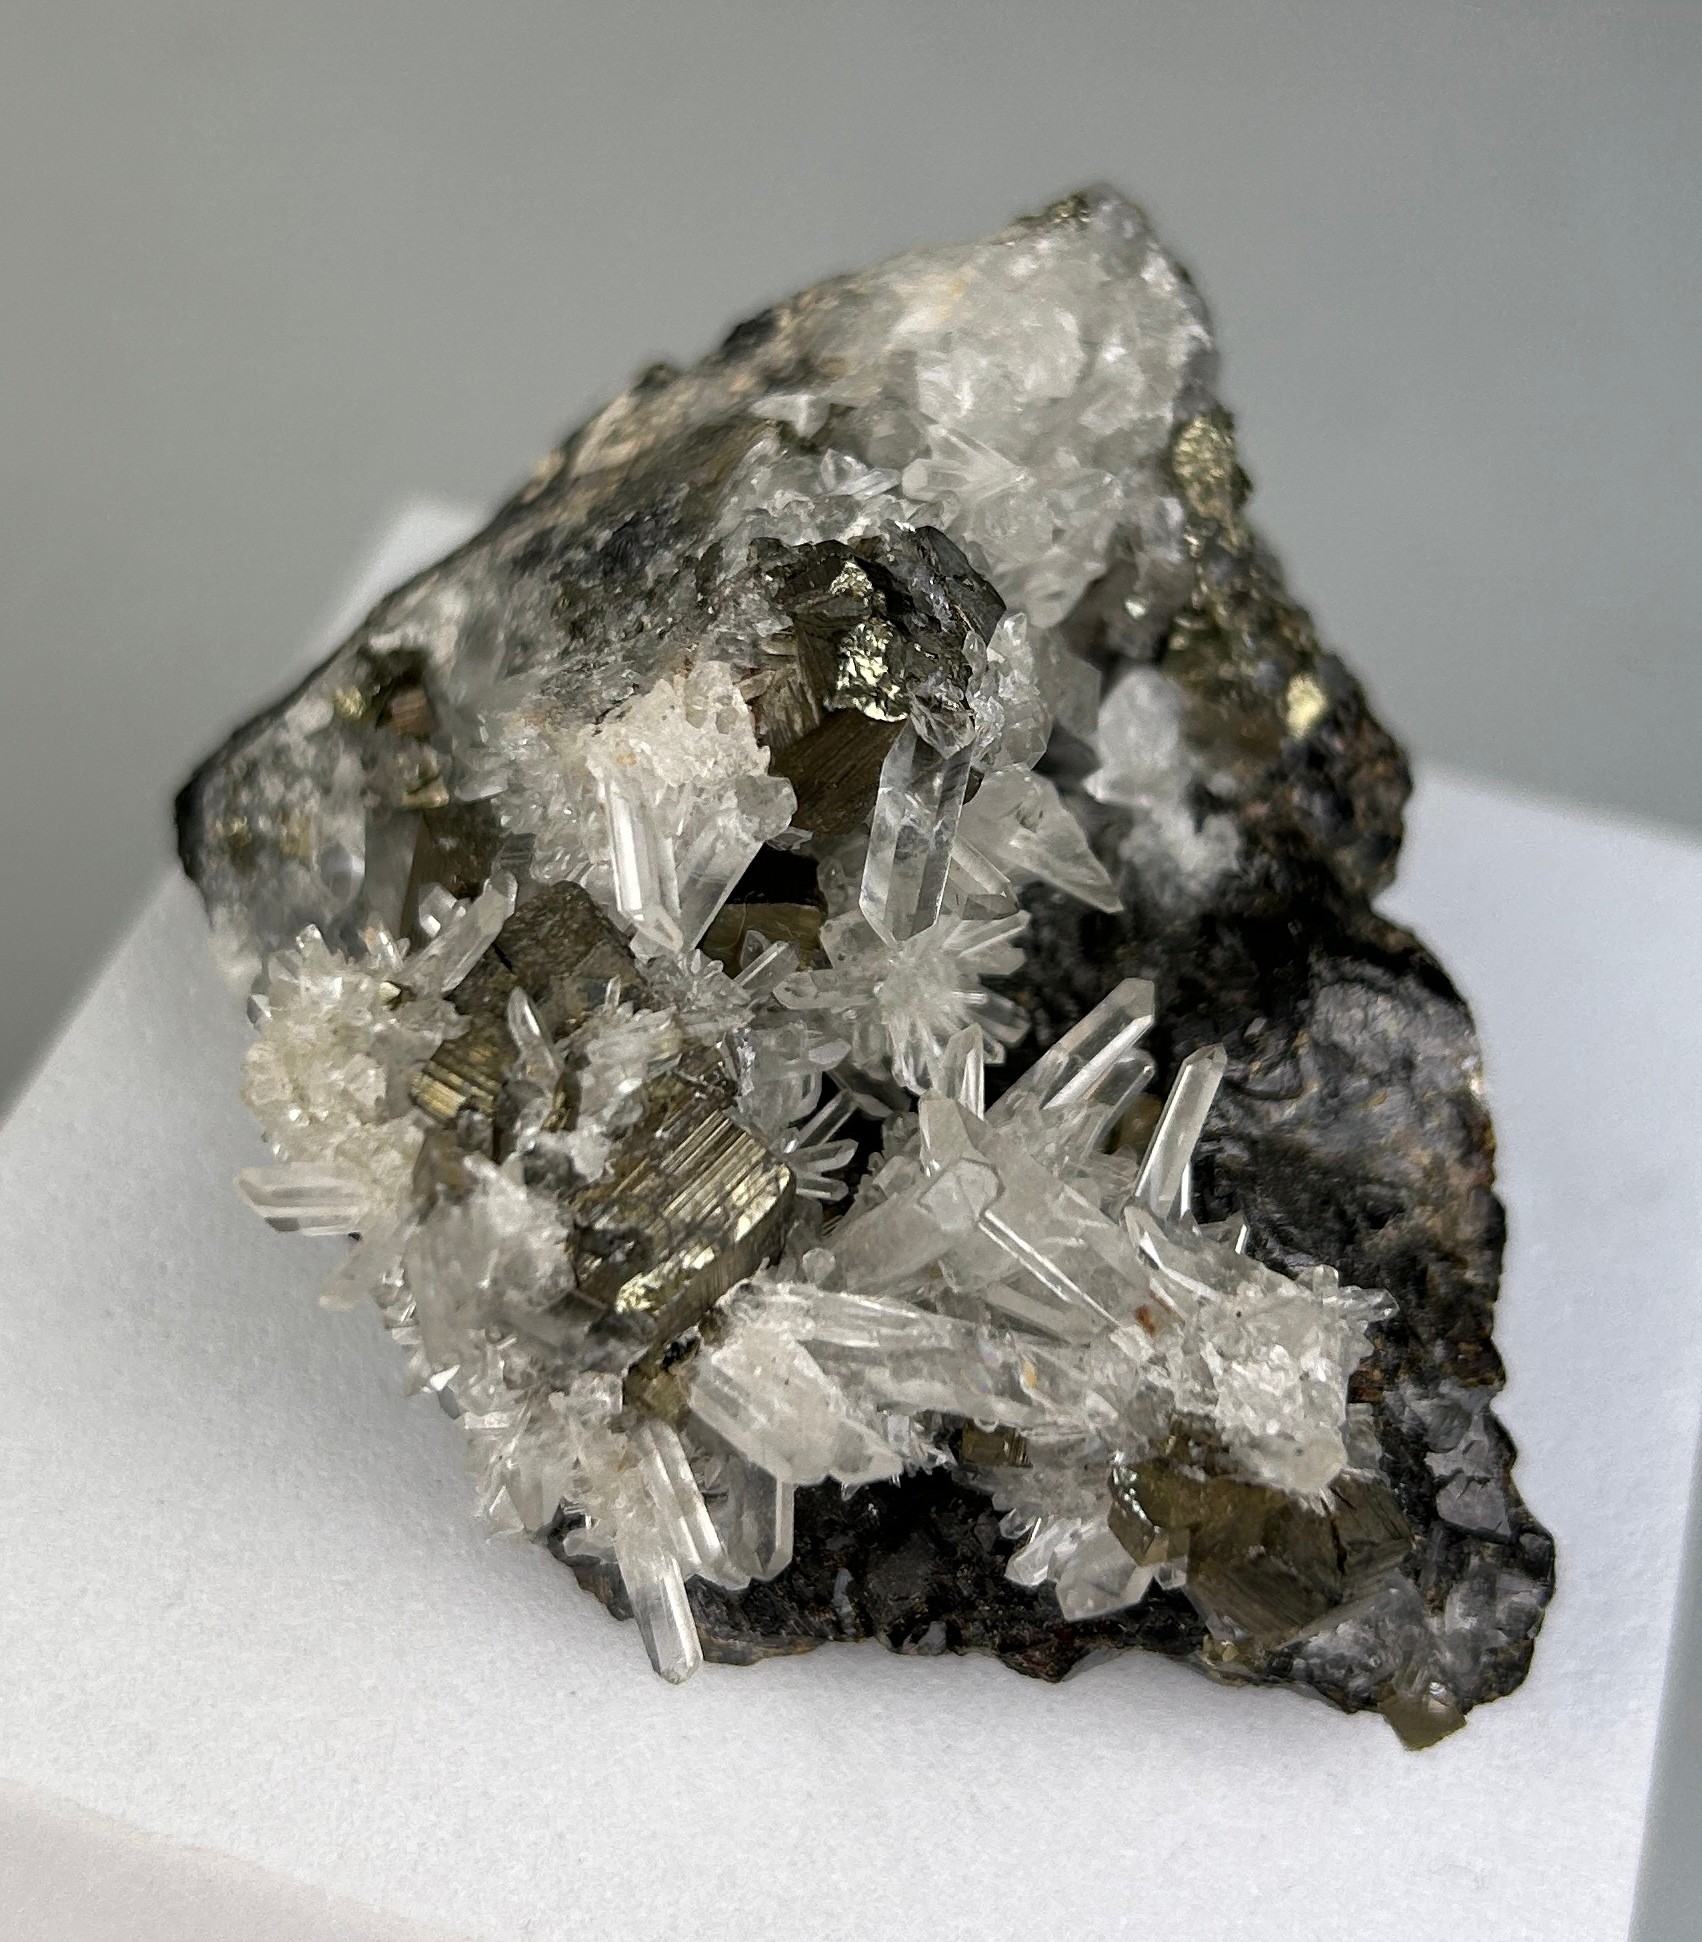 AN UNUSUAL MINERAL OF PYRITE AND QUARTZ 7cm x 5cm x 5cm - Image 3 of 4